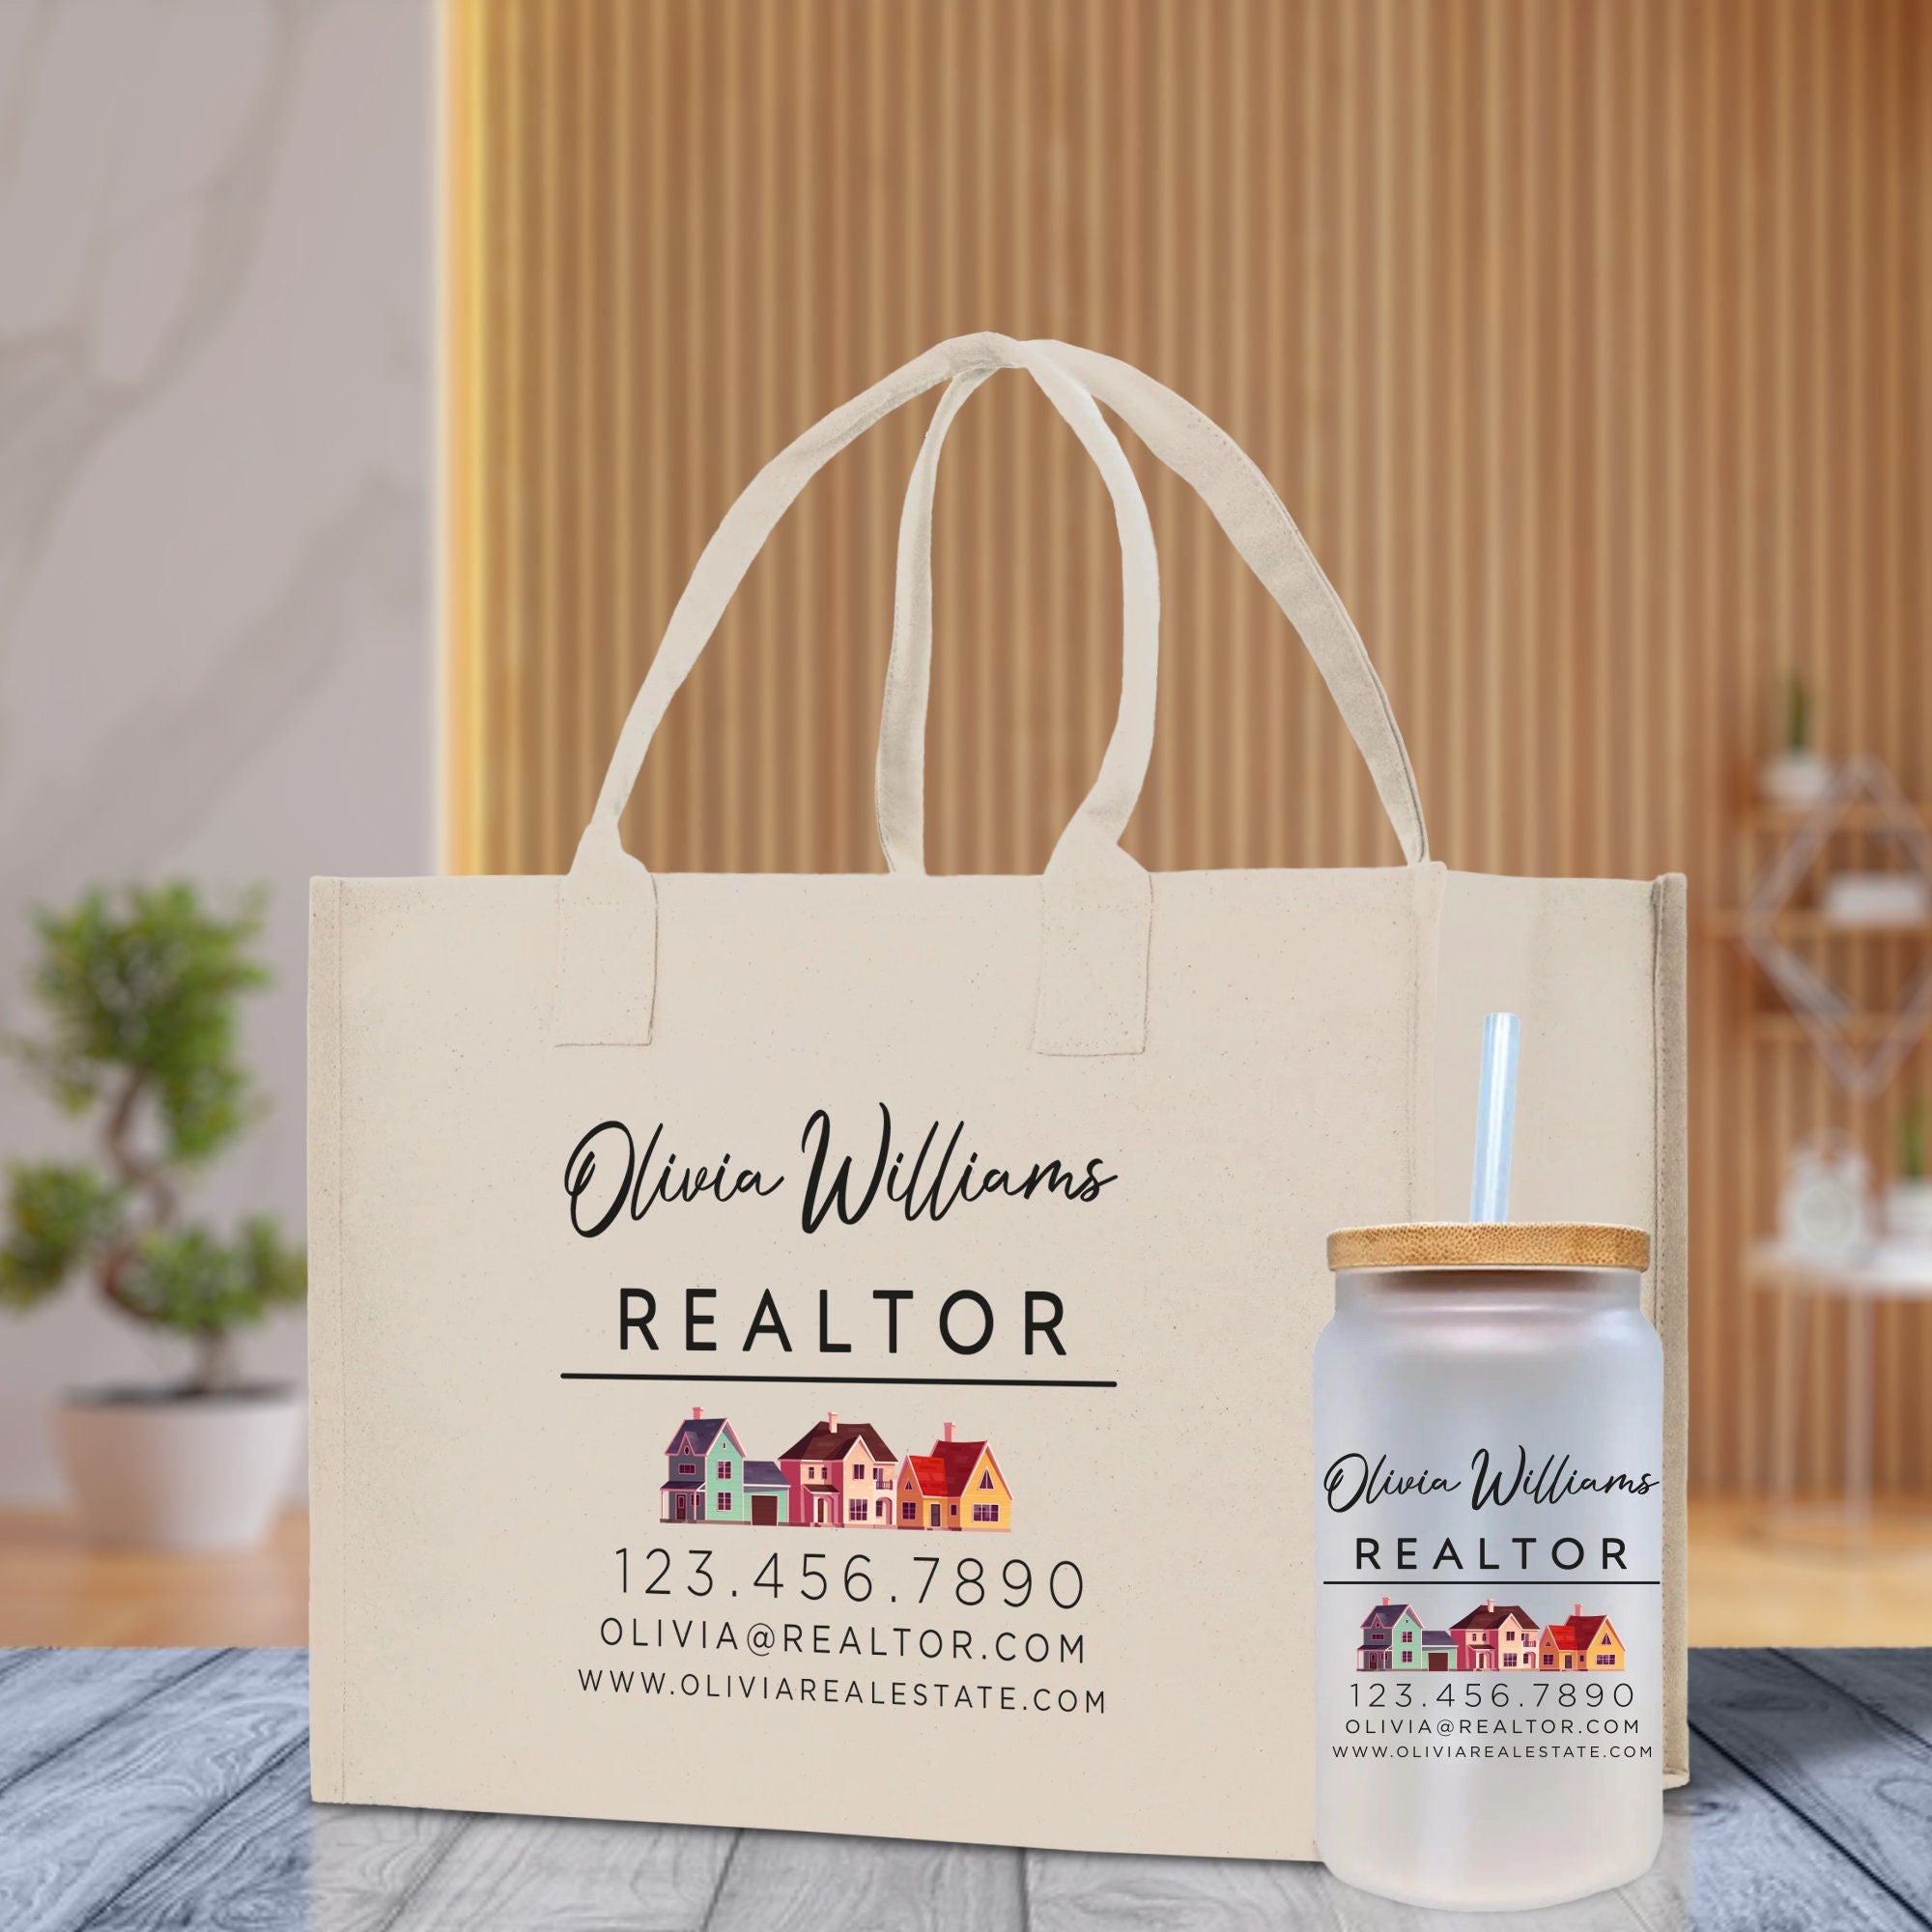 a bag and a bottle of realtor on a table